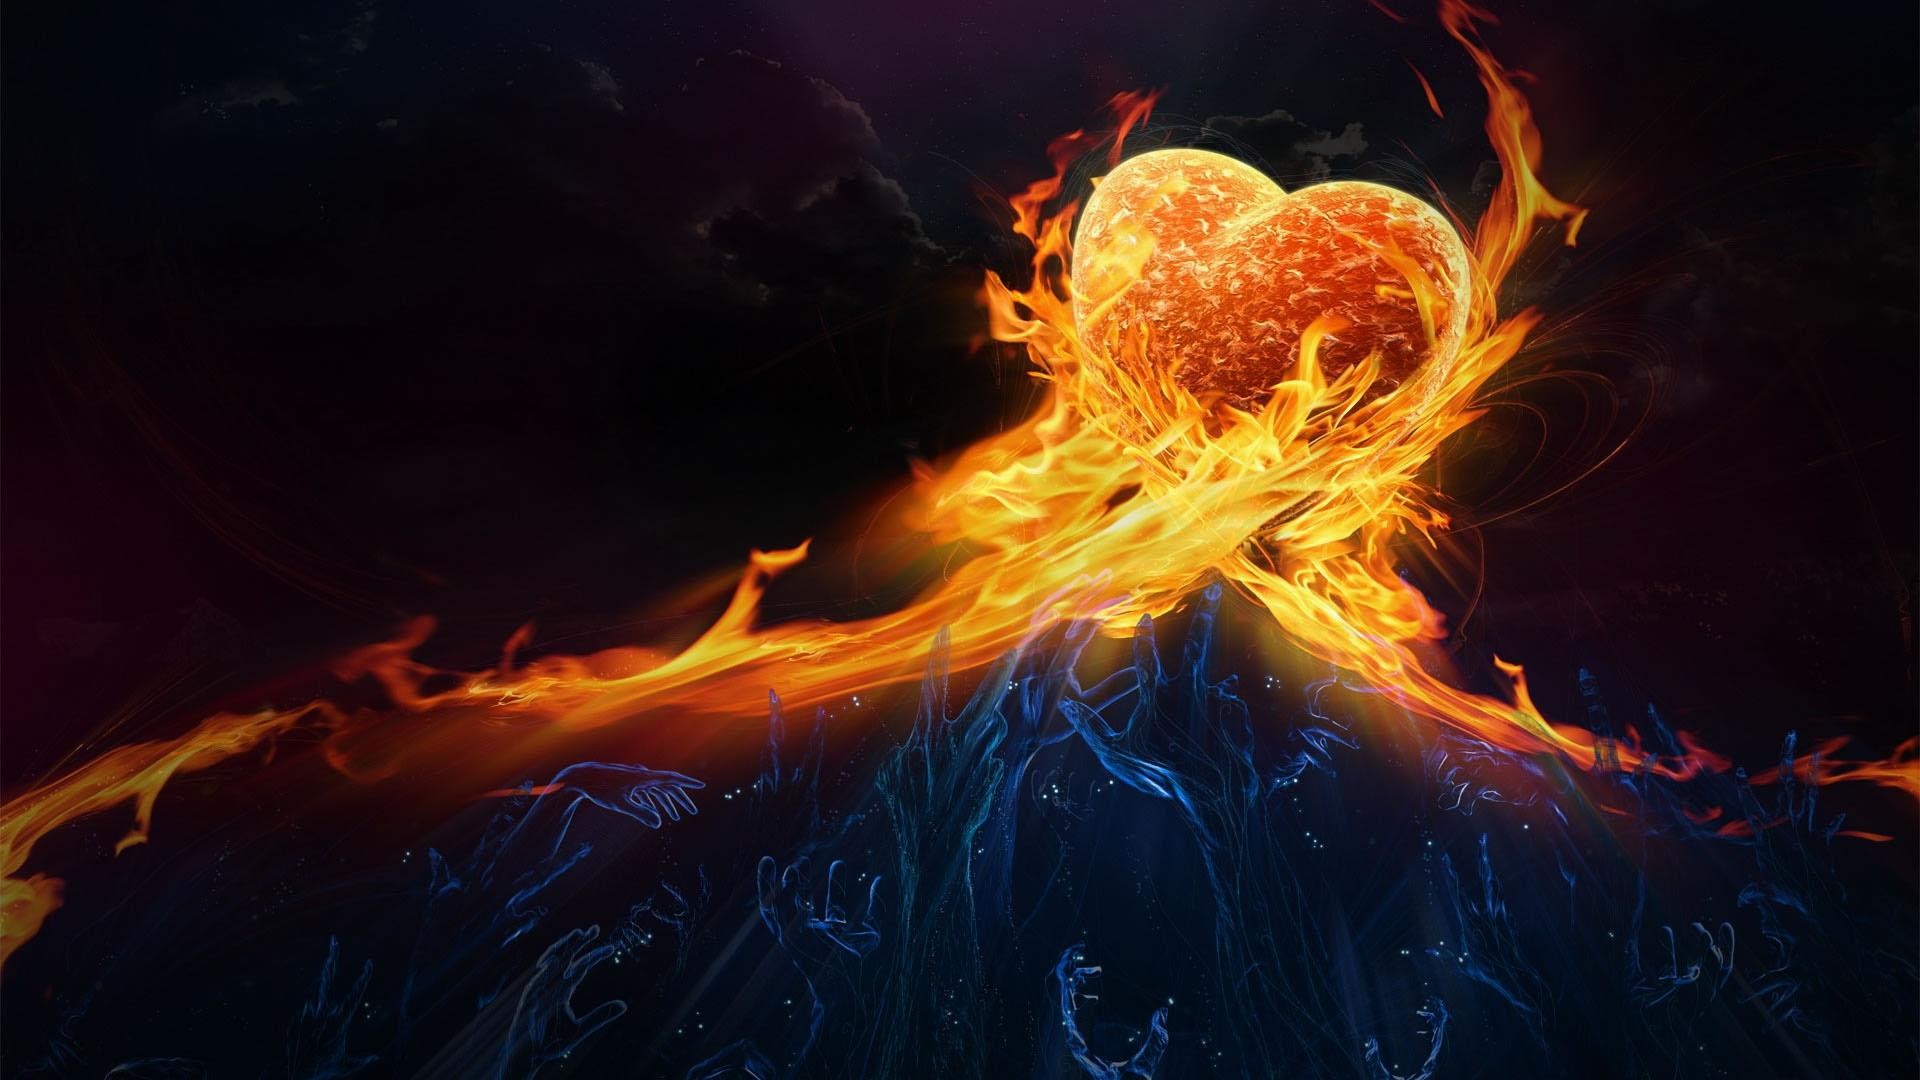 1920x1080 wallpaper.wiki-Cool-abstract-fire-love-PIC-WPD0010157